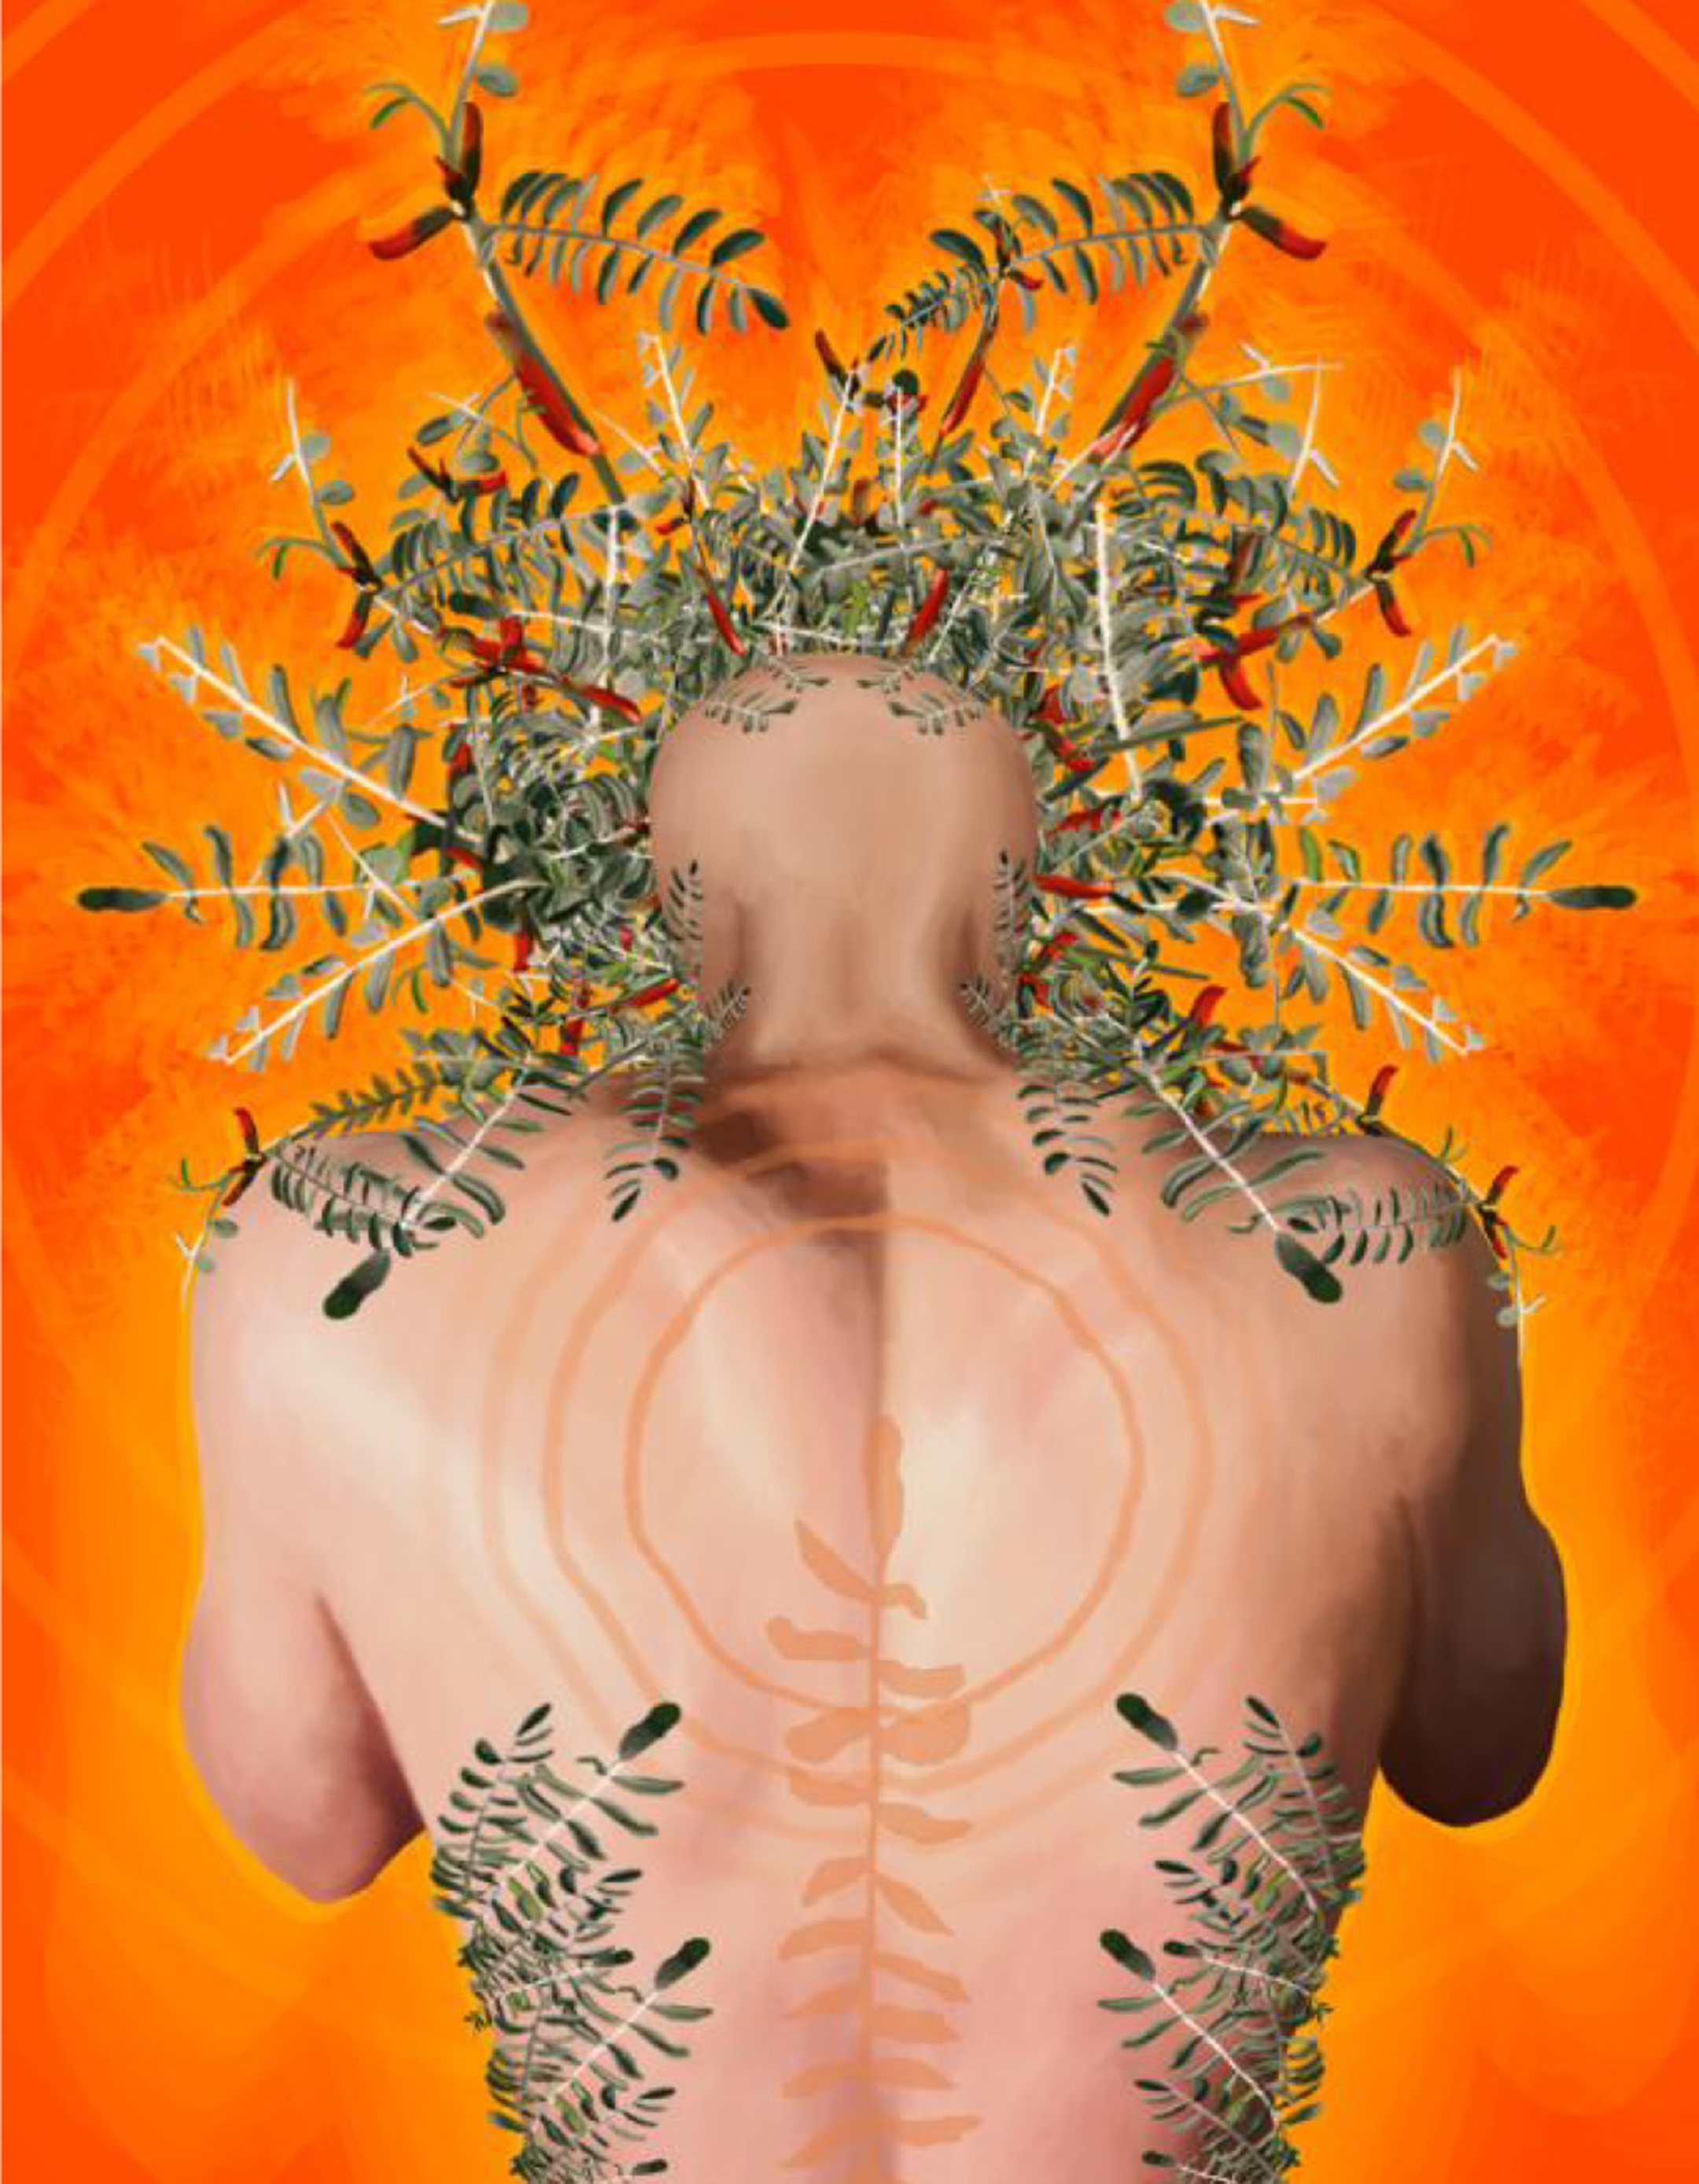 Illustration of a man, seen from behind, with plants growing from his torso and head, against an orange background